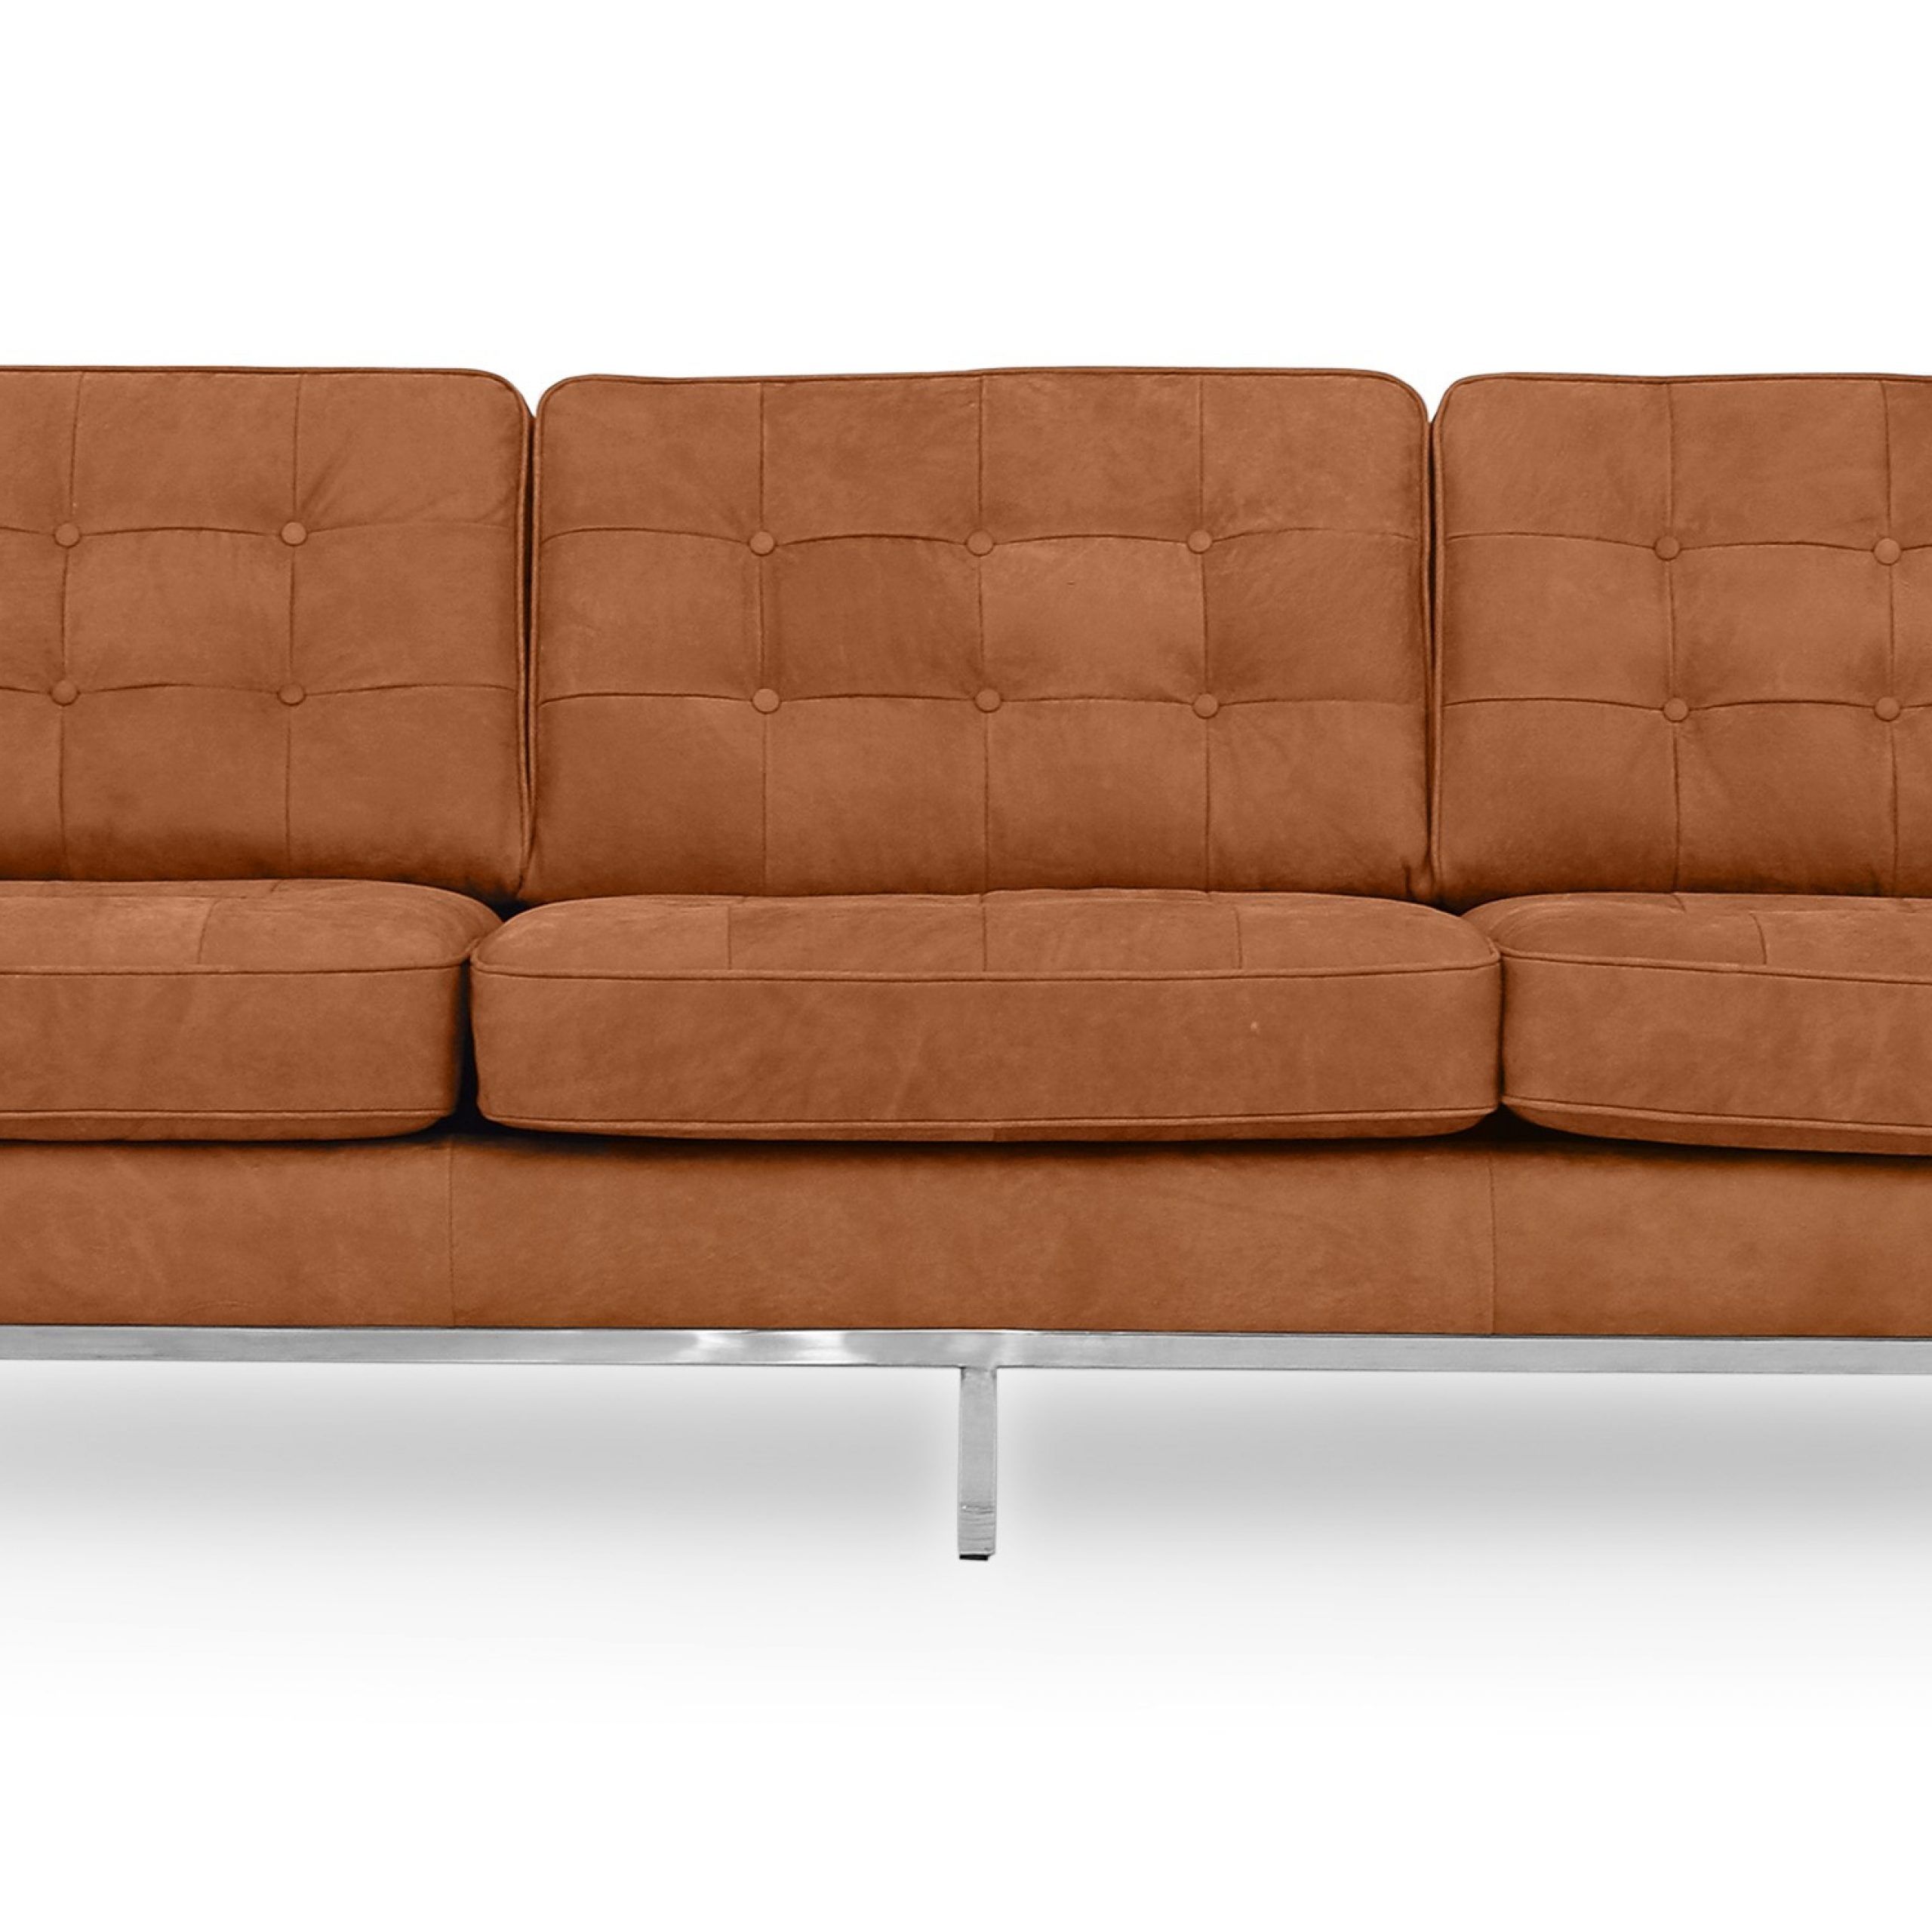 Kardiel Florence Mid Century Modern 89" Sofa, Cognac Full For Latest Florence Mid Century Modern Right Sectional Sofas (View 2 of 25)